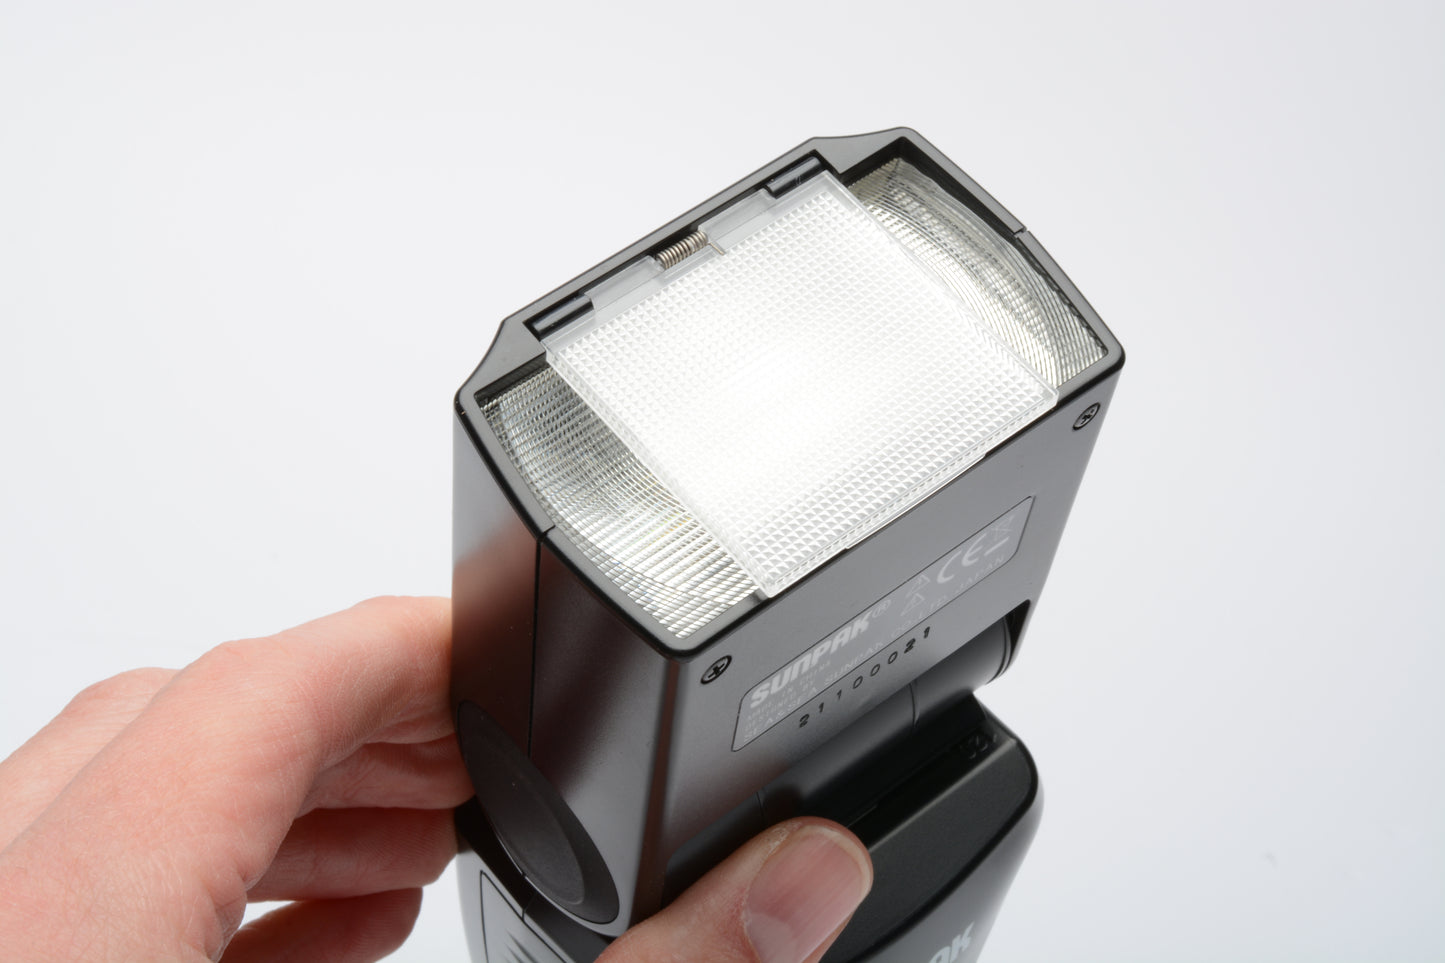 Sunpak PZ42X flash for Sony A-Mount cameras, tested, clean